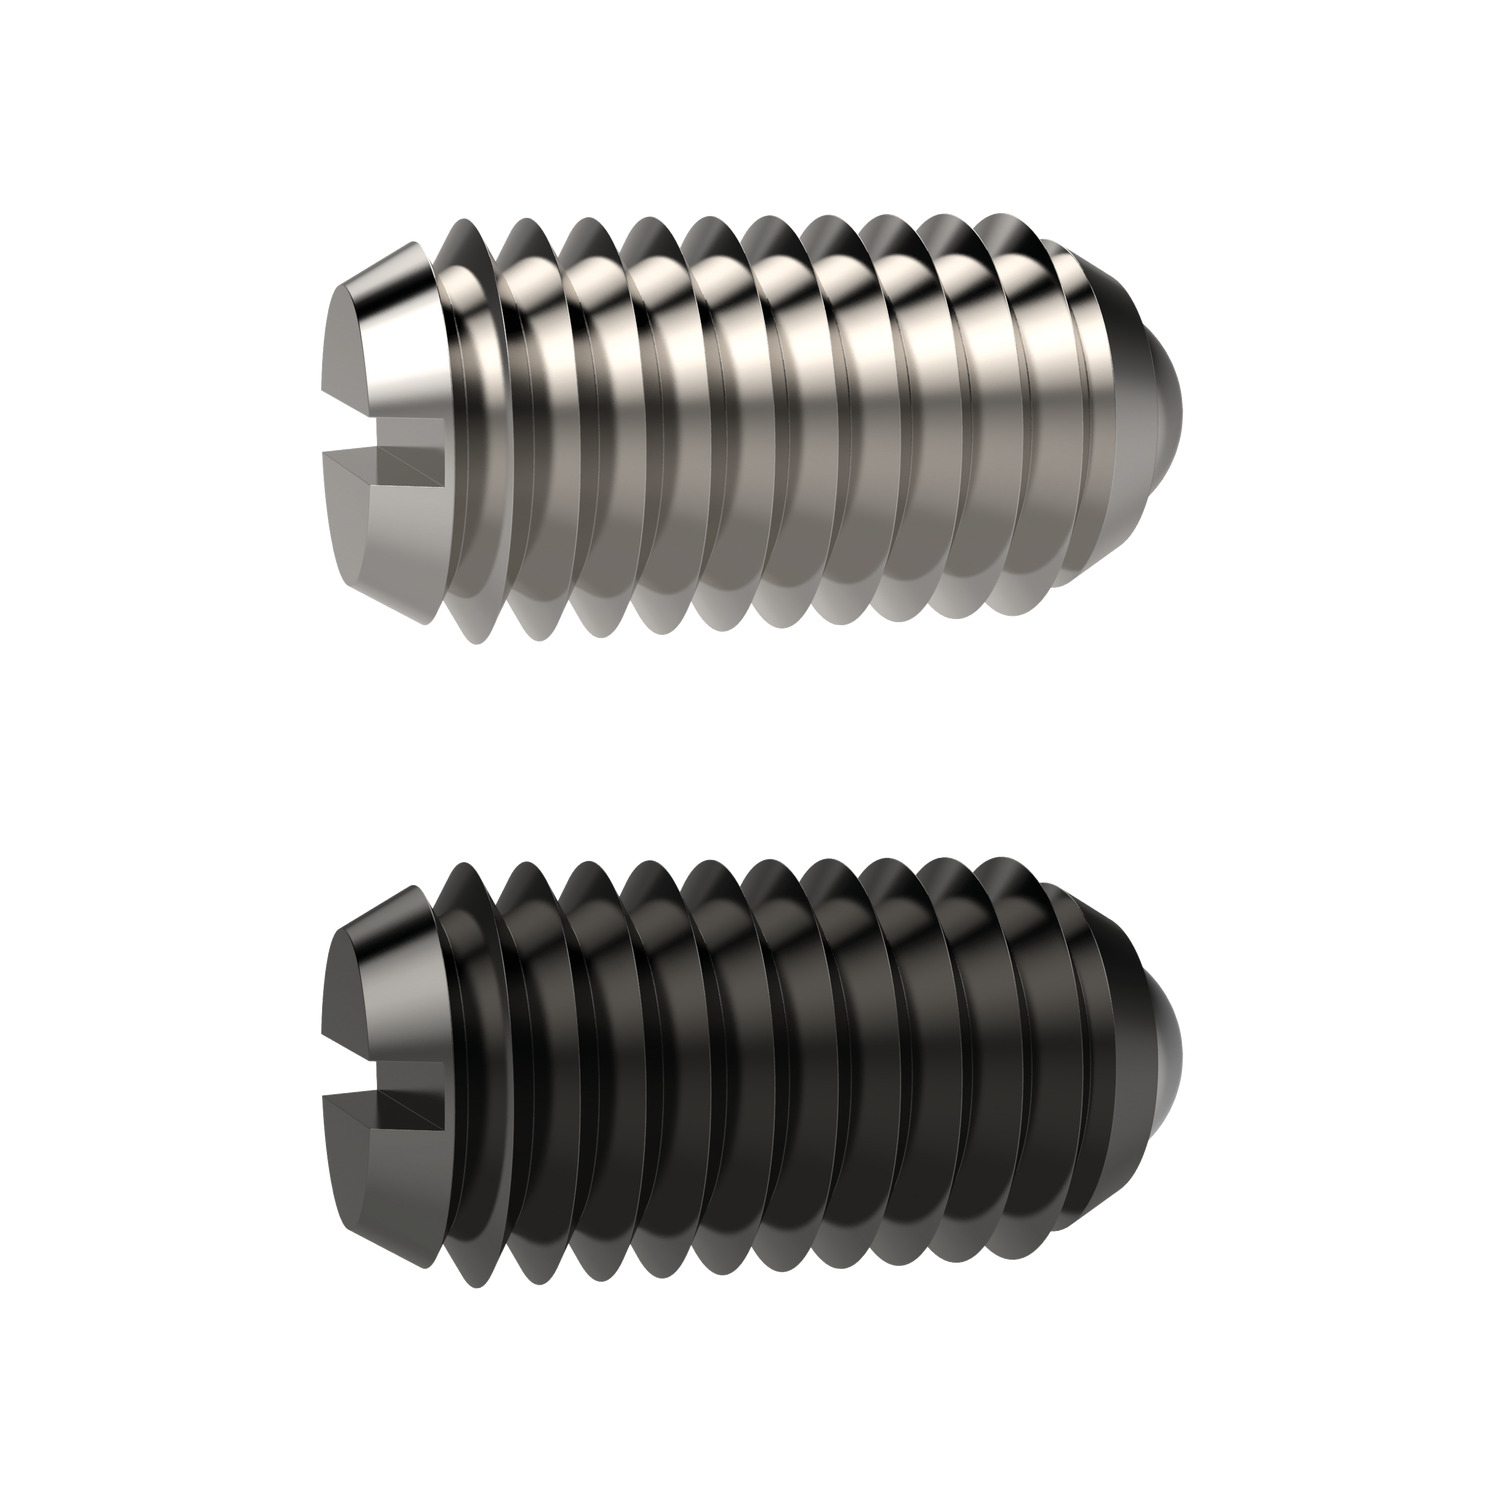 Spring Plungers A ball end and slot spring plunger available in steel & stainless steel with sizes starting from M2 upto M24. Increased spring strength variations provided within the standard range.